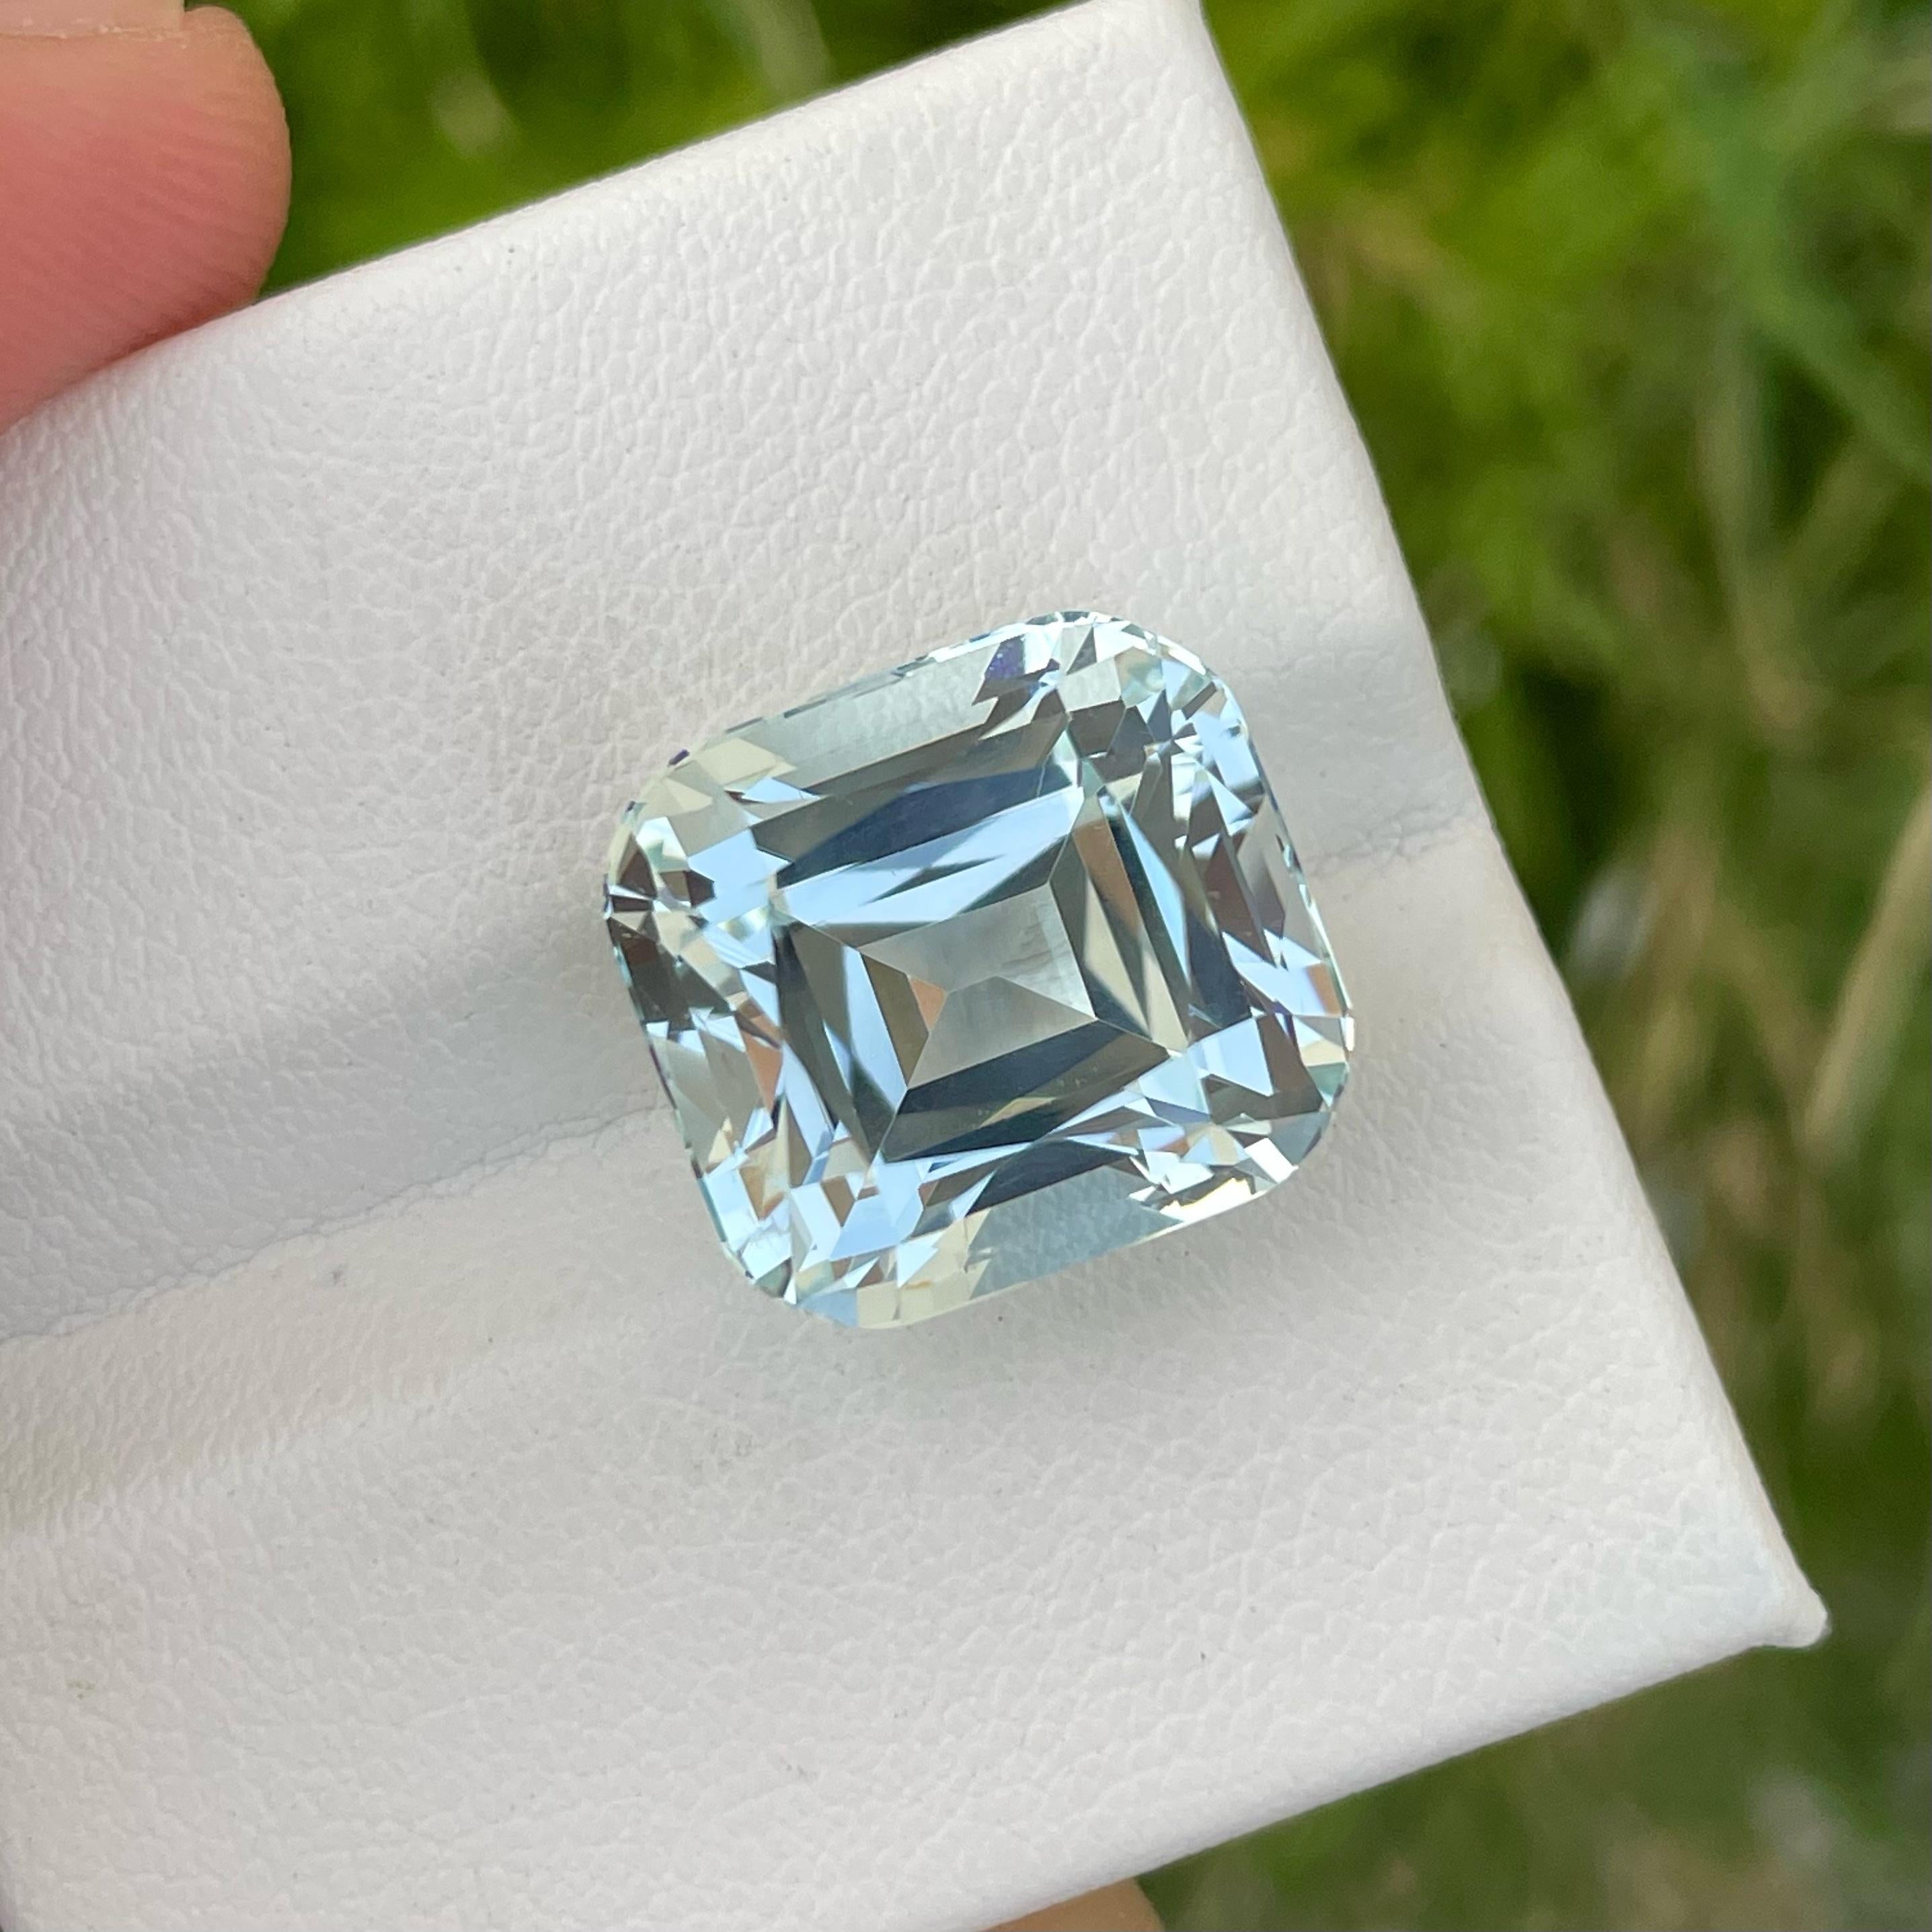 AAA Quality Aquamarine Gemstone, available for sale at best price natural loose gemstone for jewelry making, Loupe clean quality, 17.15 carats certified aquamarine.

Product Information:
GEMSTONE TYPE	AAA Quality Aquamarine: Gemstone
WEIGHT:	17.15